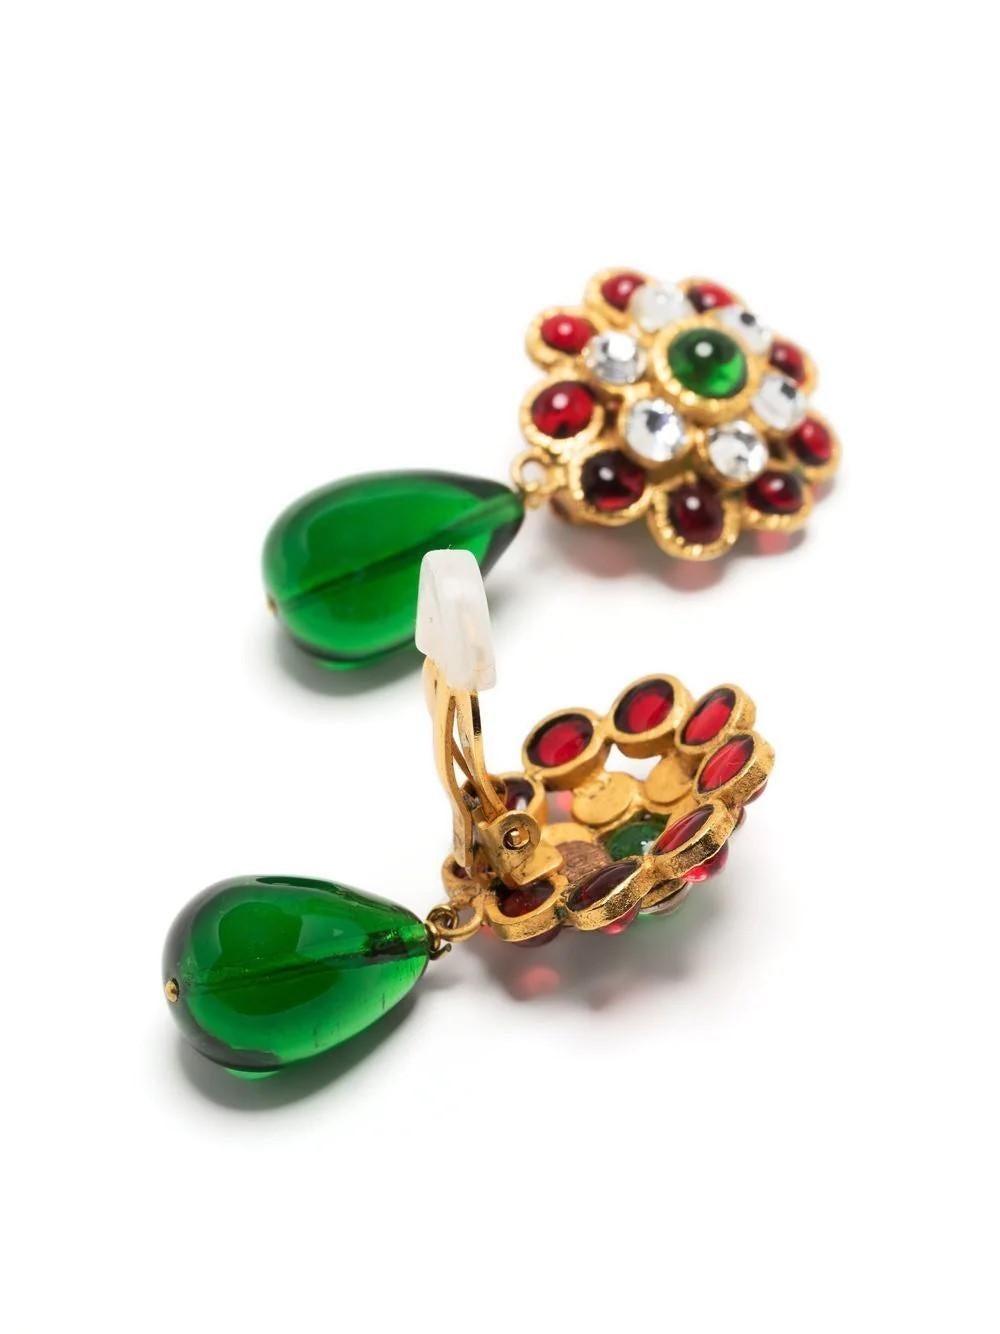 Working alongside Paris' famed jeweller specialising in glass beading, Gripoix Paris, Chanel presents these gold-plated drop earrings. Rich red and green-hued glass beads adorn the pair alongside crystal embellishments, with the pear-cut drop